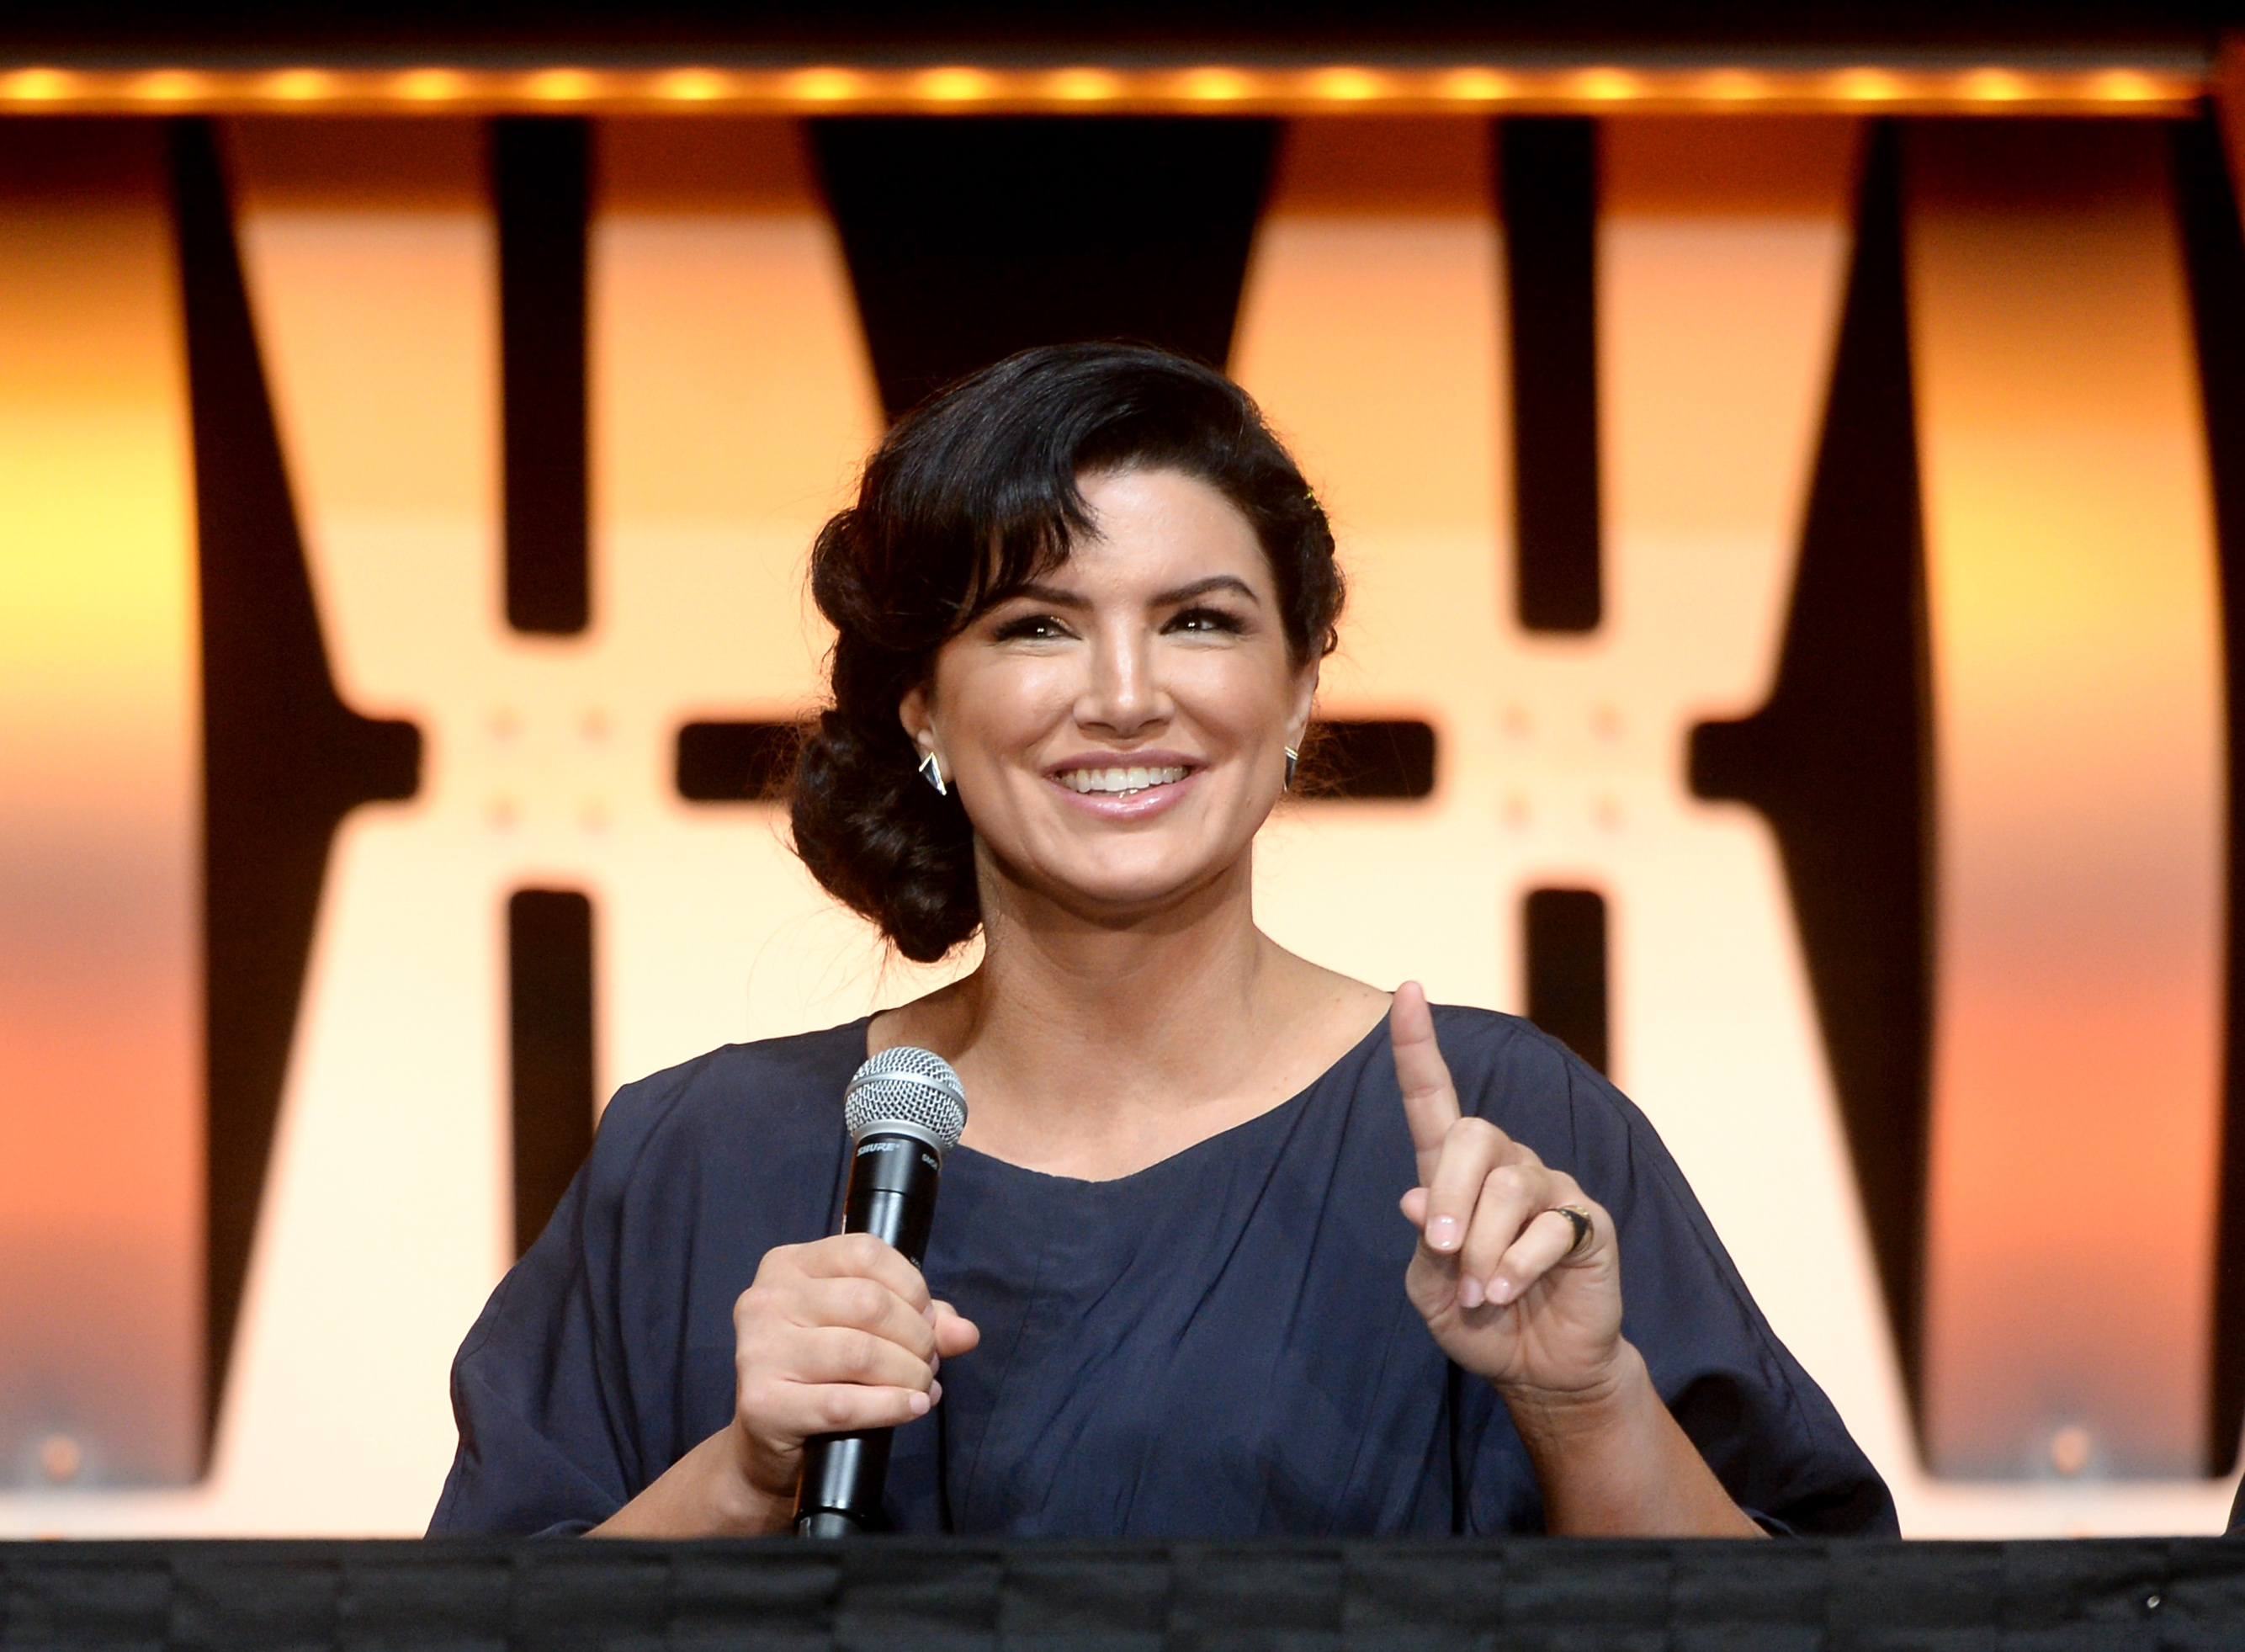 Gina Carano Fans Petition Disney To Rehire Her on 'The Mandalorian'